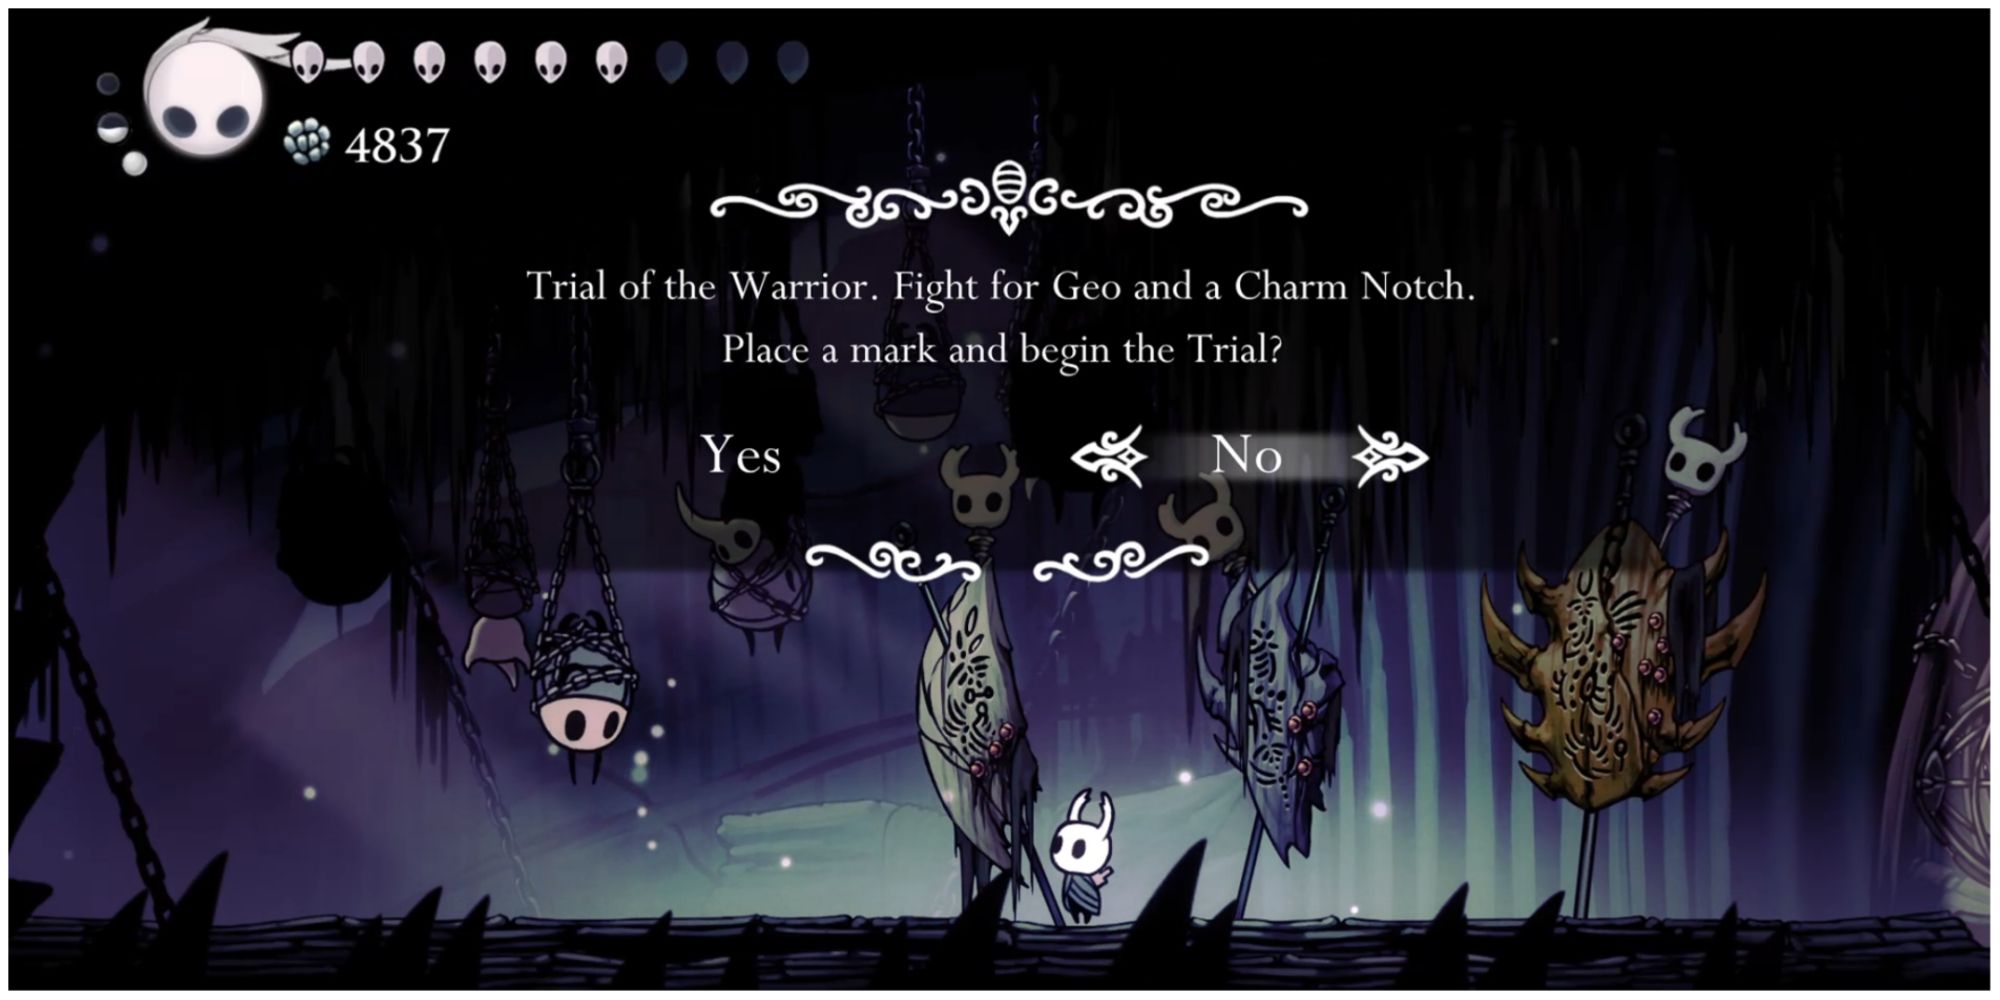 Hollow Knight Trial of the Warrior prompt in the Colosseum of Fools